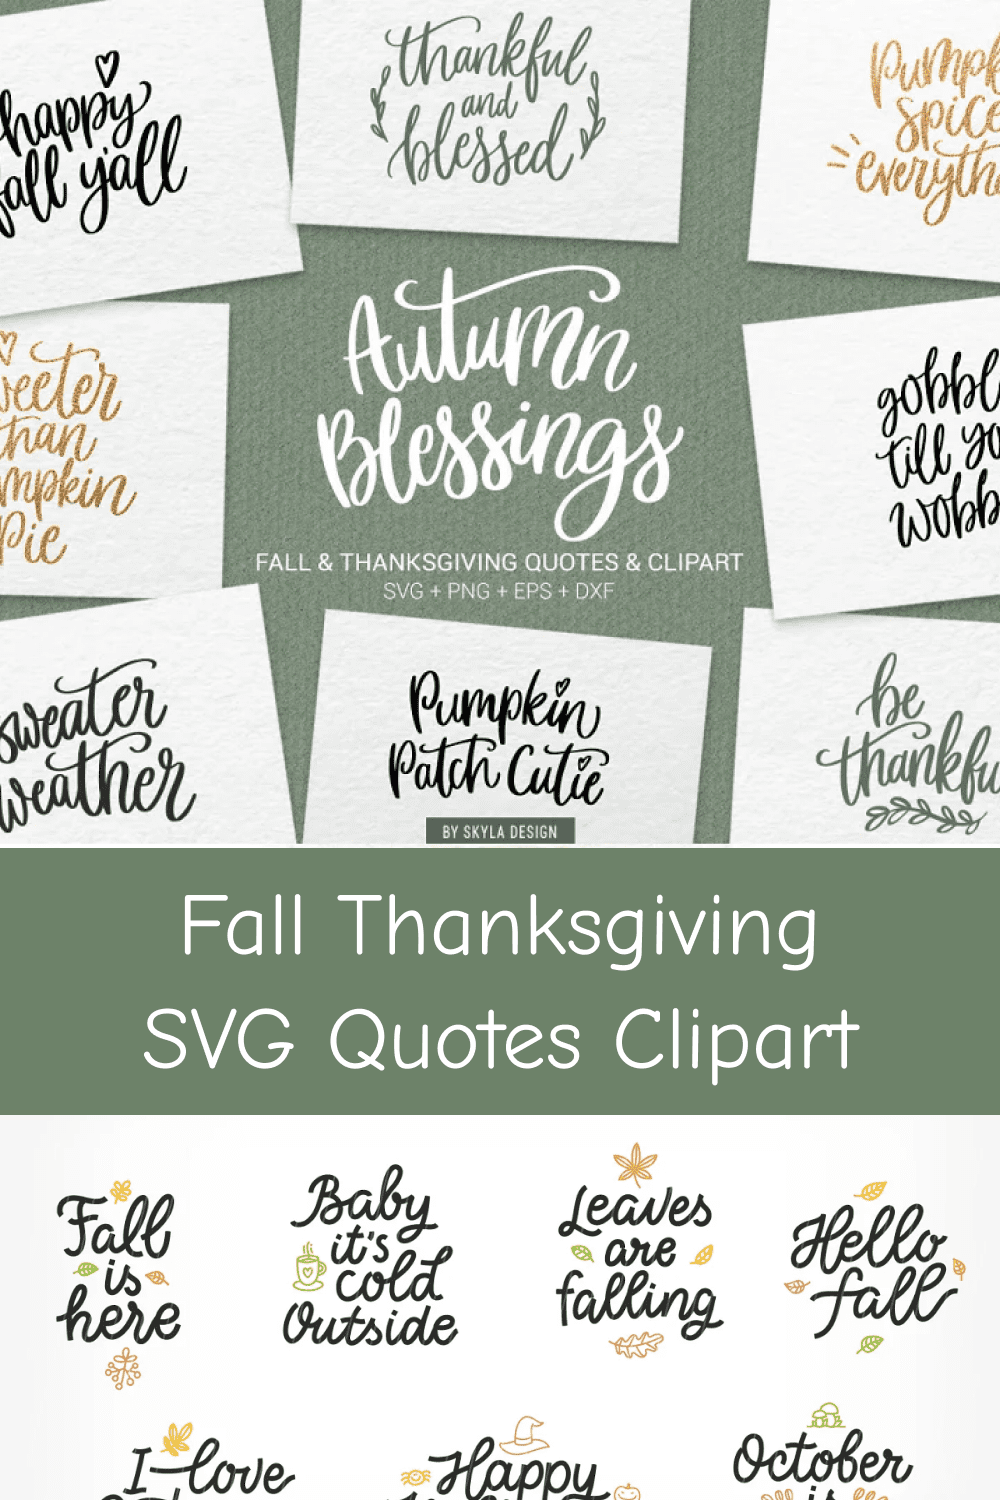 Fall Thanksgiving SVG Quotes Clipart.